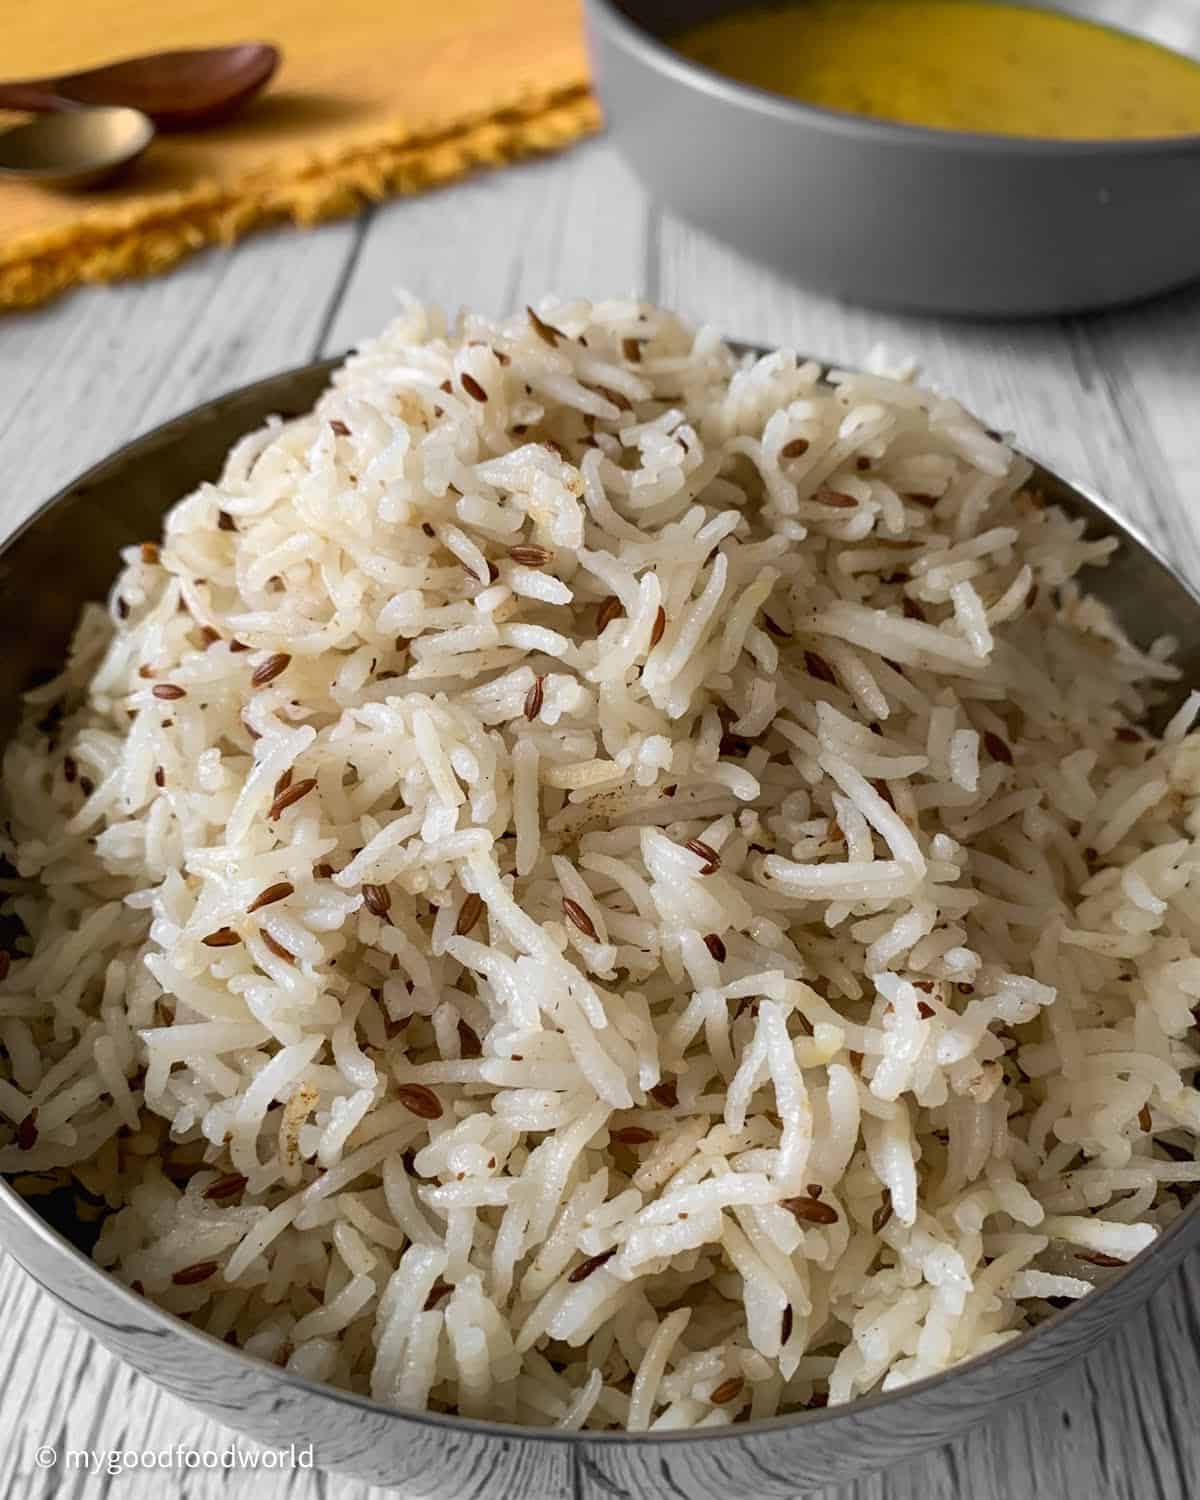 Cooked cumin rice is being served in a round stainless steel bowl on a white patterned background.